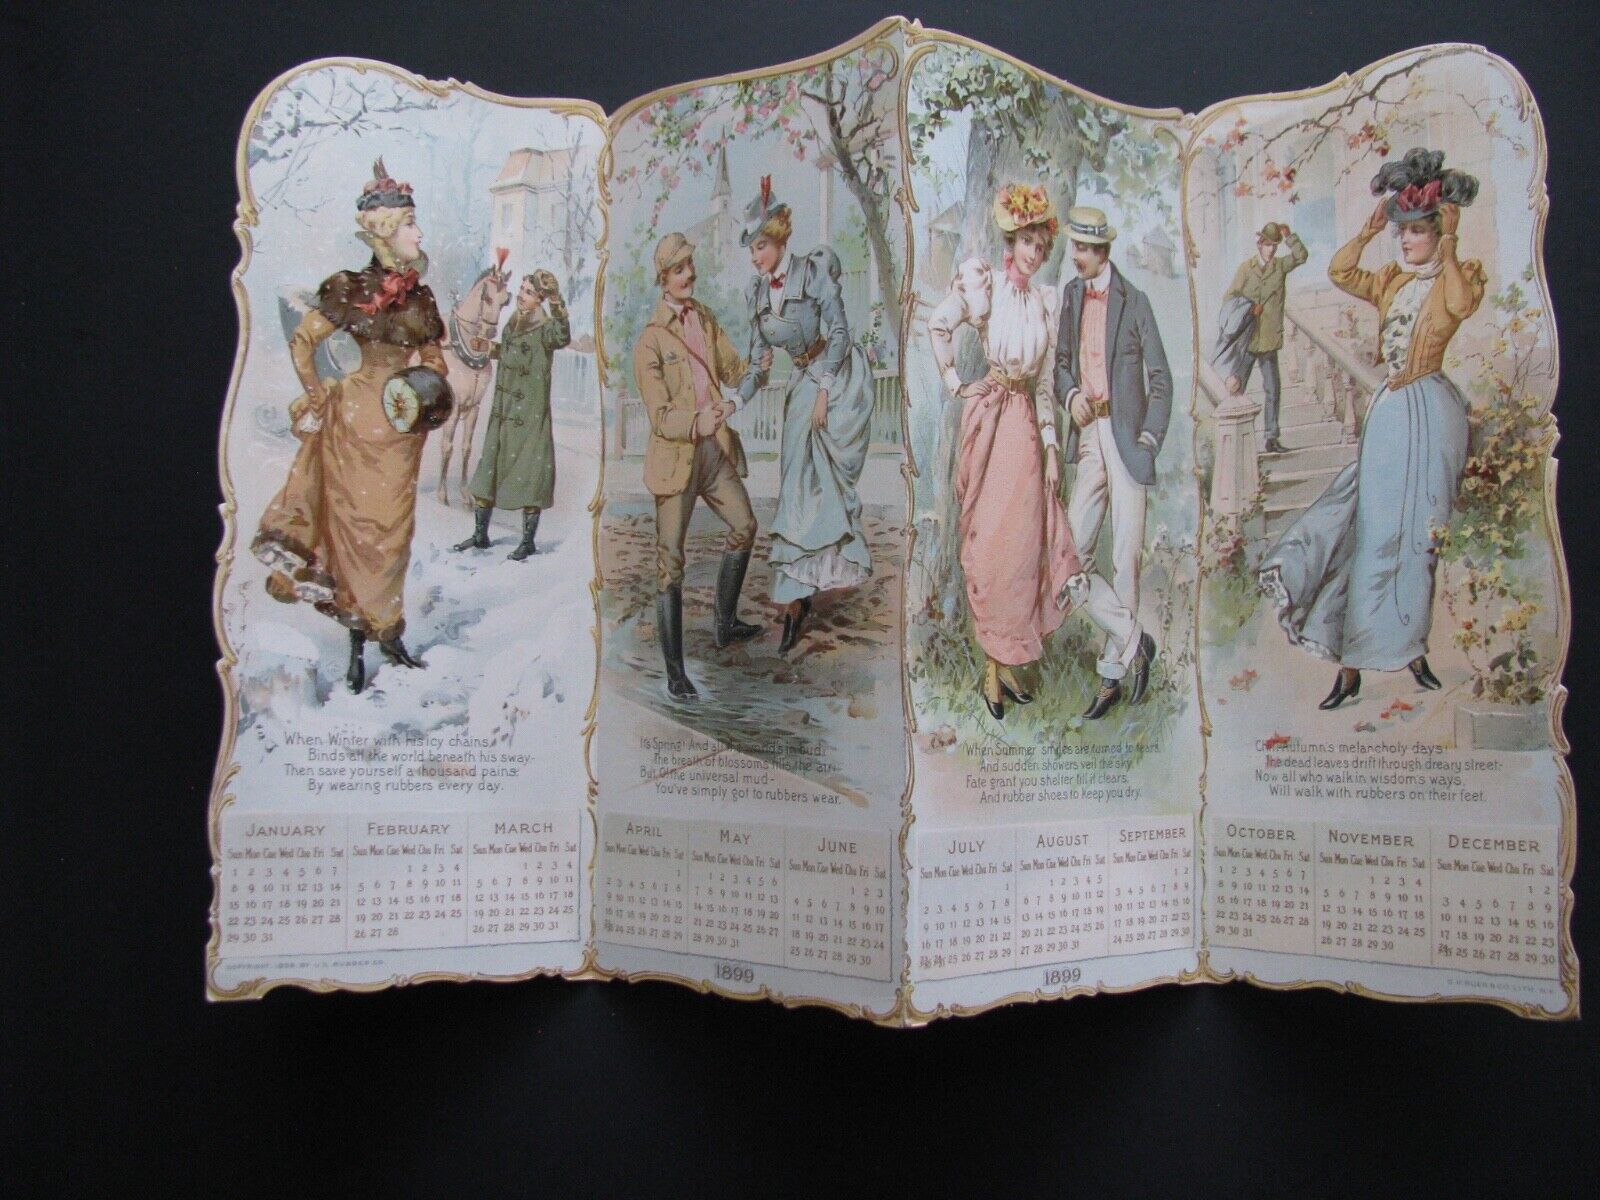 ANTIQUE ROMANTIC FASHION ADVERTISING CALENDAR FOLDOUT STANDS UP FOR DISPLAY 1899